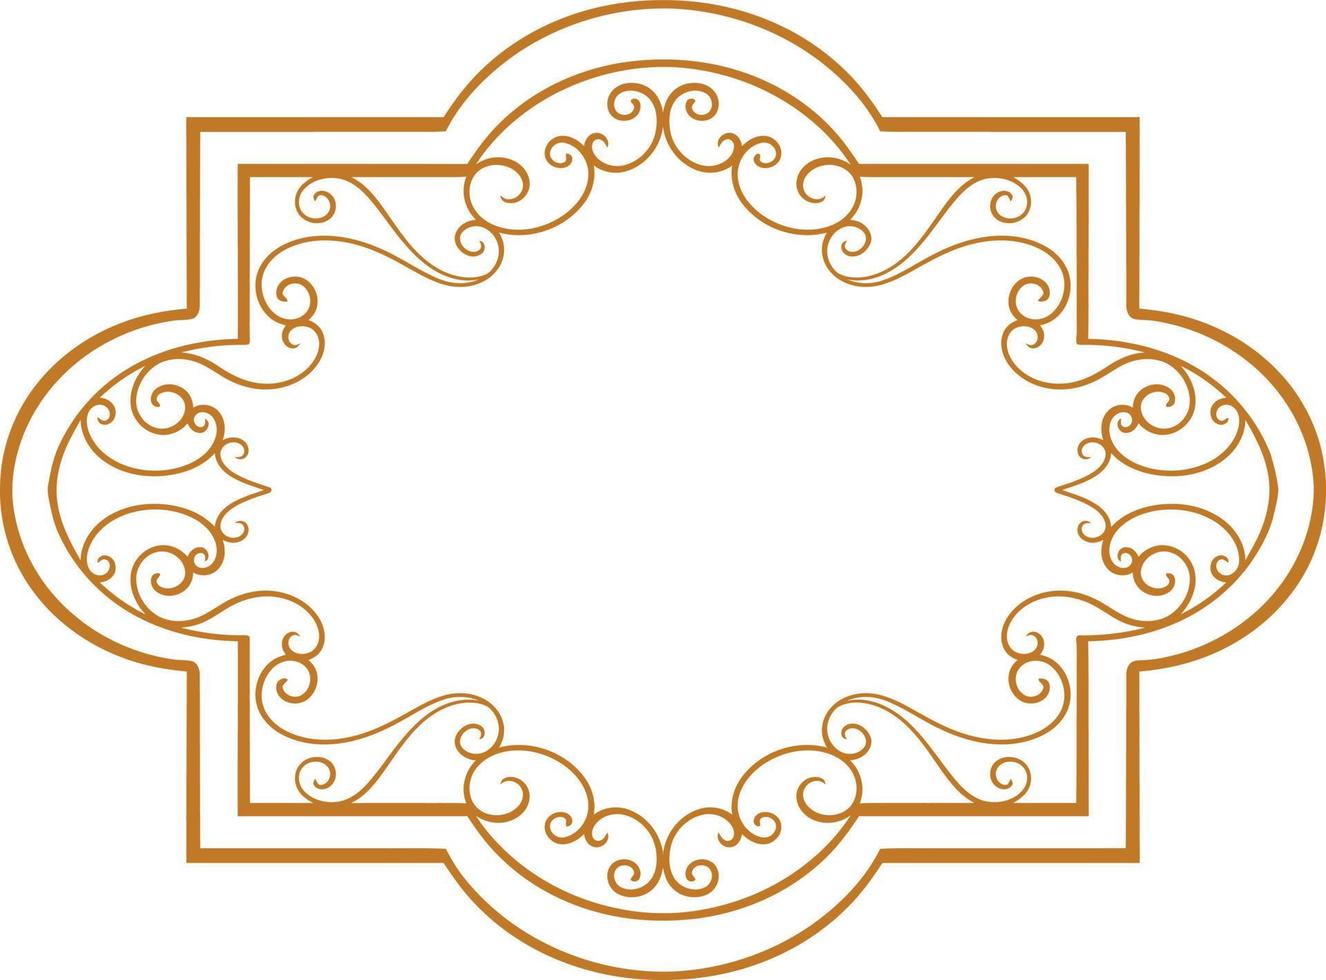 simple classic ornament frame design engraved color vector editable